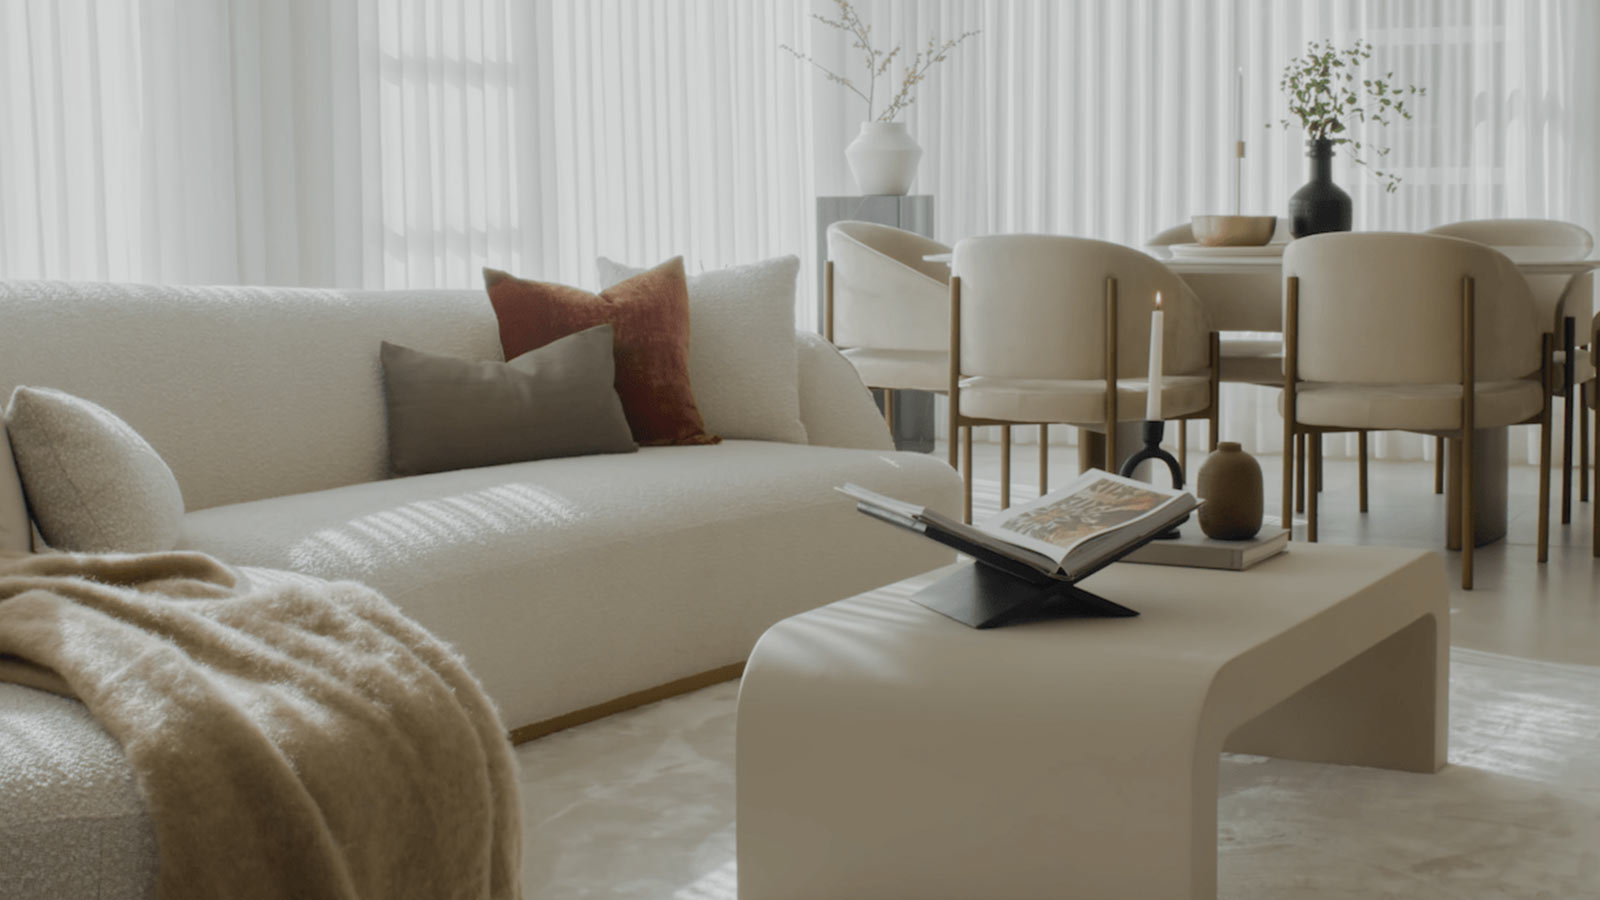 This image captures a serene and minimalist living space bathed in natural light. In the foreground, a large, plush sofa in a textured off-white fabric is adorned with decorative pillows in muted earth tones. A cozy beige throw blanket is draped over one end of the sofa. A sleek, modern coffee table in front of the sofa holds a neatly stacked collection of hardcover books, one open as if recently browsed through. In the background, a dining area is visible, featuring a round table surrounded by elegant upholstered chairs, and a simple yet stylish vase with sprigs of greenery atop the table. Floor-to-ceiling sheer curtains filter the sunlight, creating a soft and tranquil atmosphere. The color palette is neutral, with whites and creams predominating, accented by the natural colors of the books and foliage, which add a touch of warmth to the space. The overall effect is one of calm sophistication and understated luxury.